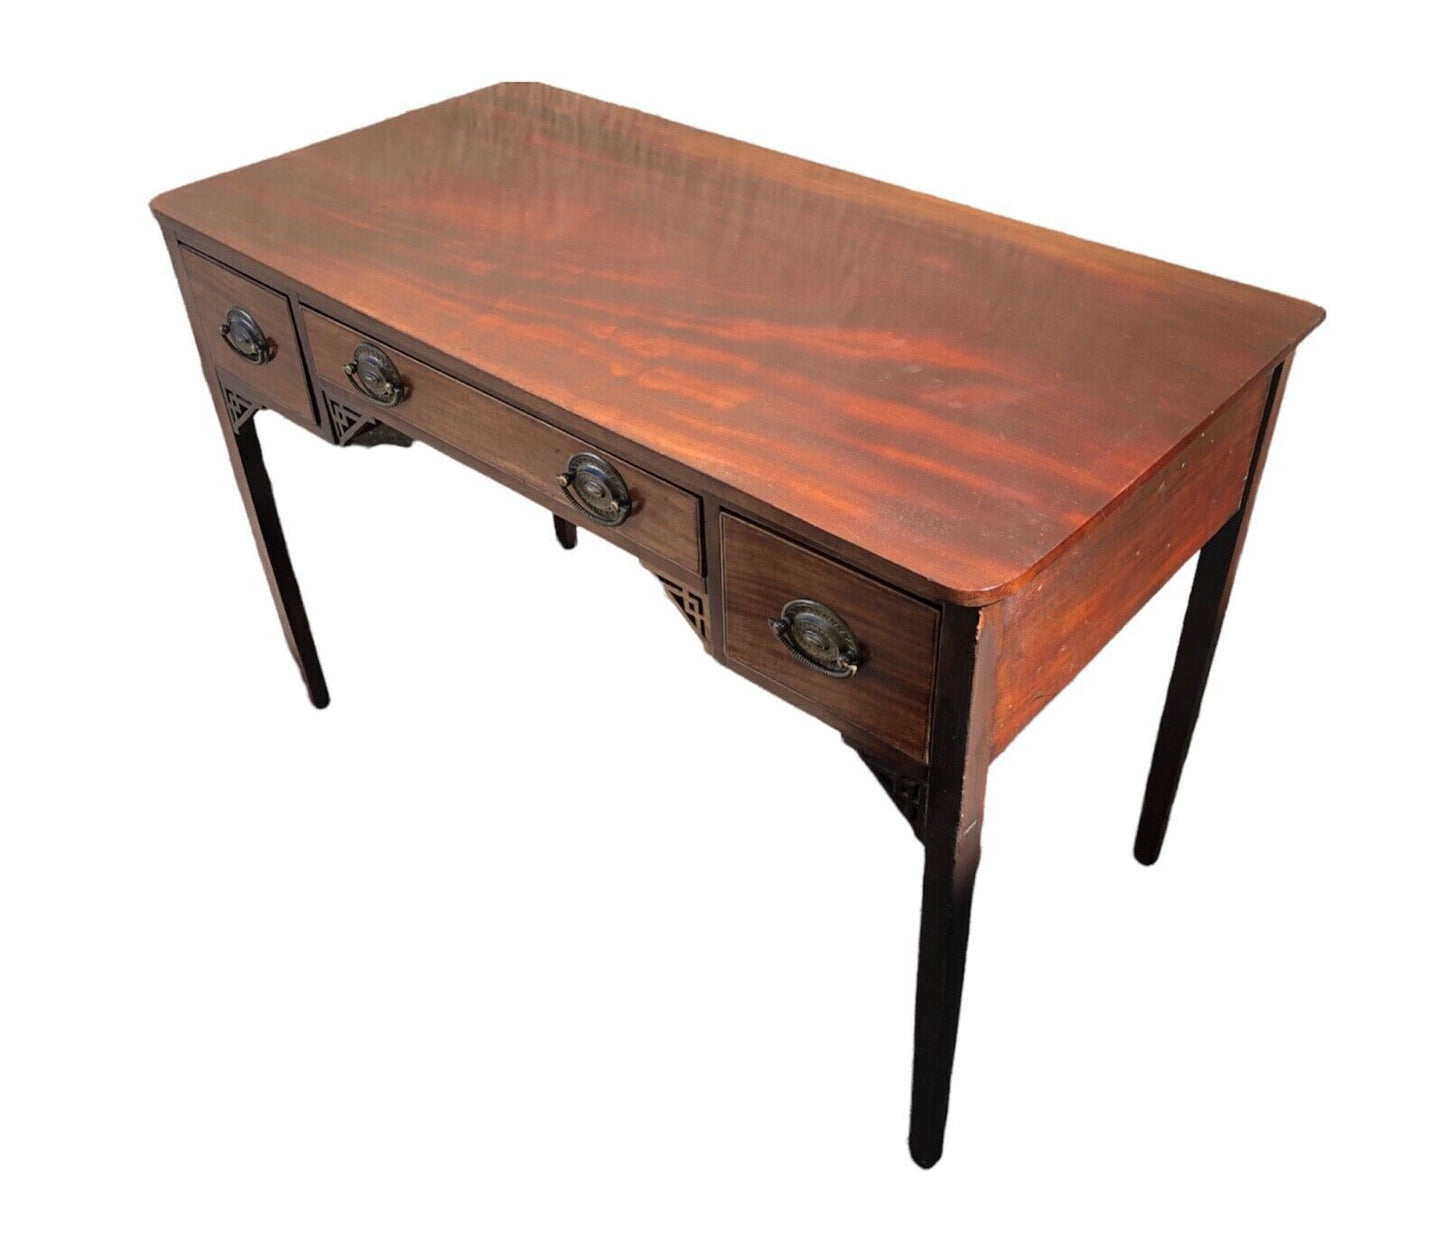 000920....Handsome Antique Mahogany Writing Or Hall Table ( sold )